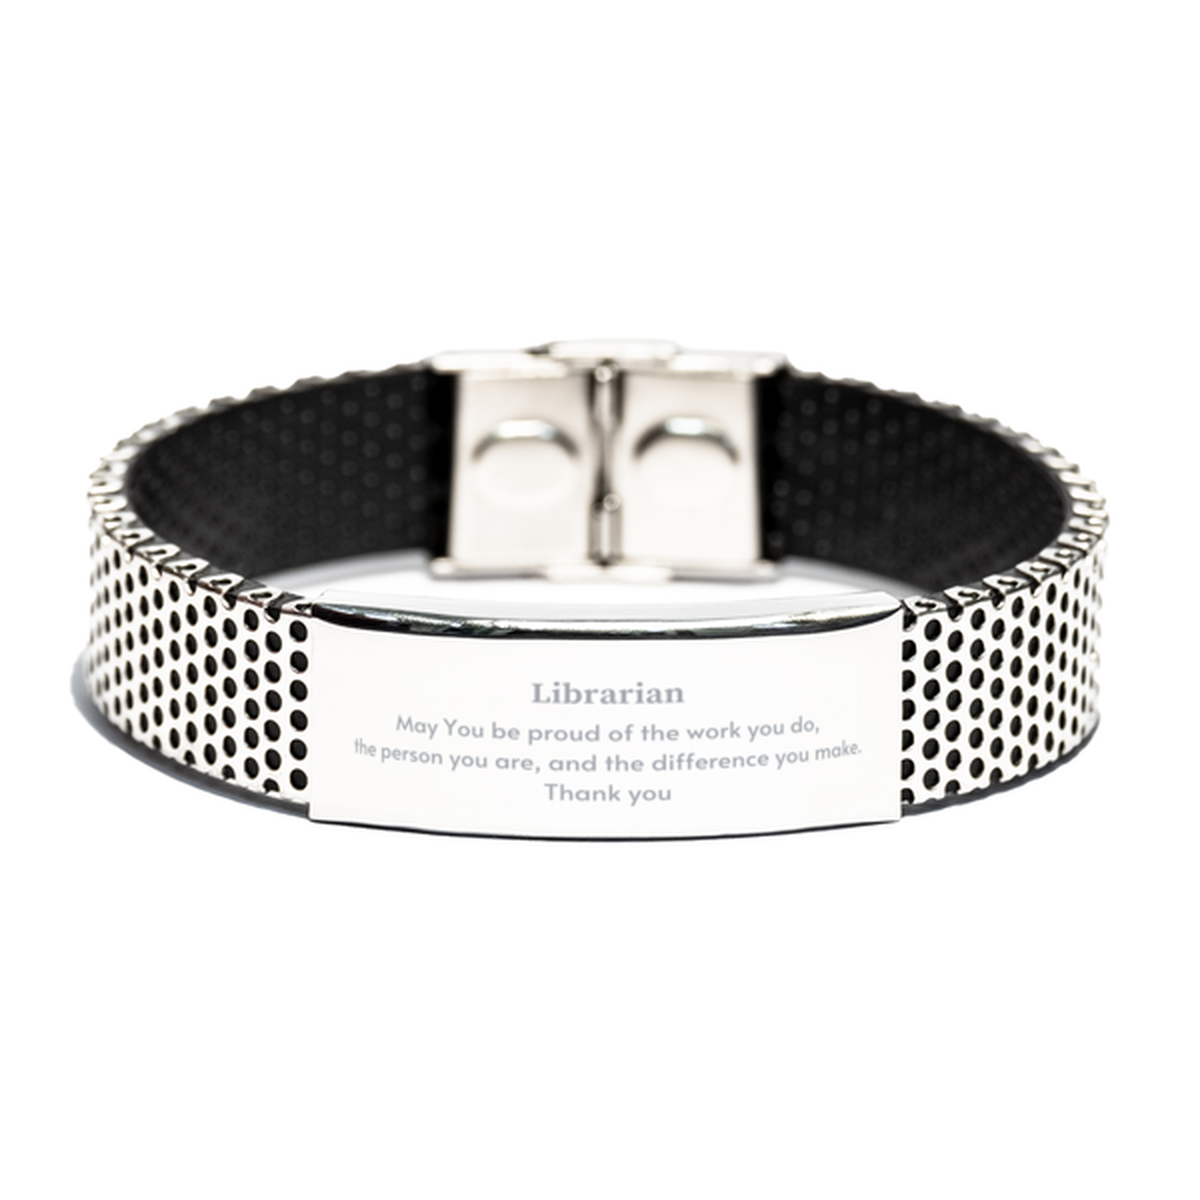 Heartwarming Stainless Steel Bracelet Retirement Coworkers Gifts for Librarian, Librarian May You be proud of the work you do, the person you are Gifts for Boss Men Women Friends